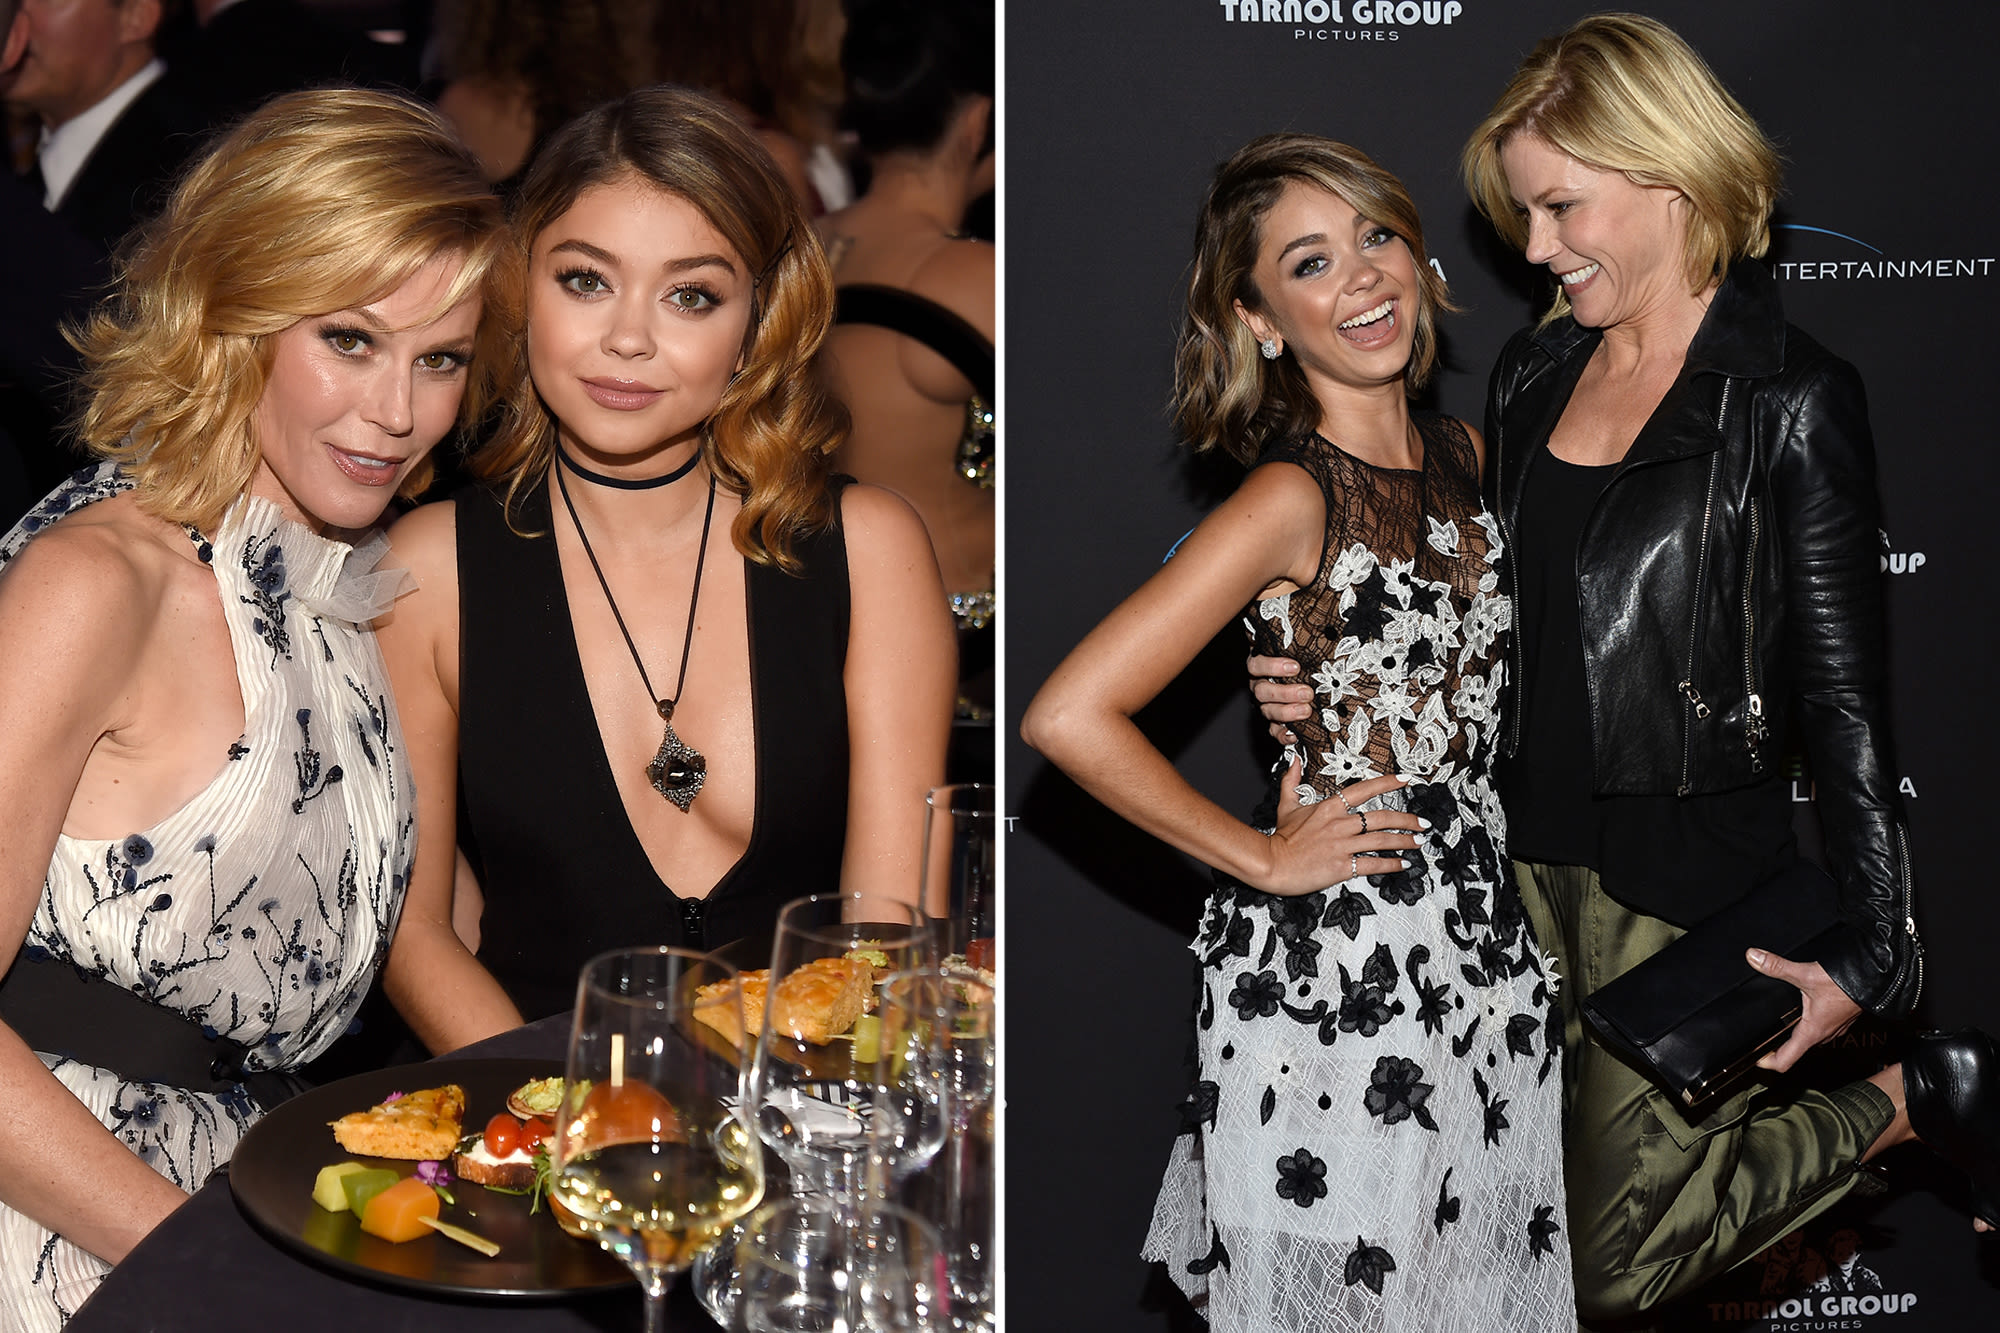 ‘Modern Family’ star Julie Bowen helped TV daughter Sarah Hyland leave abusive relationship: I was there ‘at the right time’